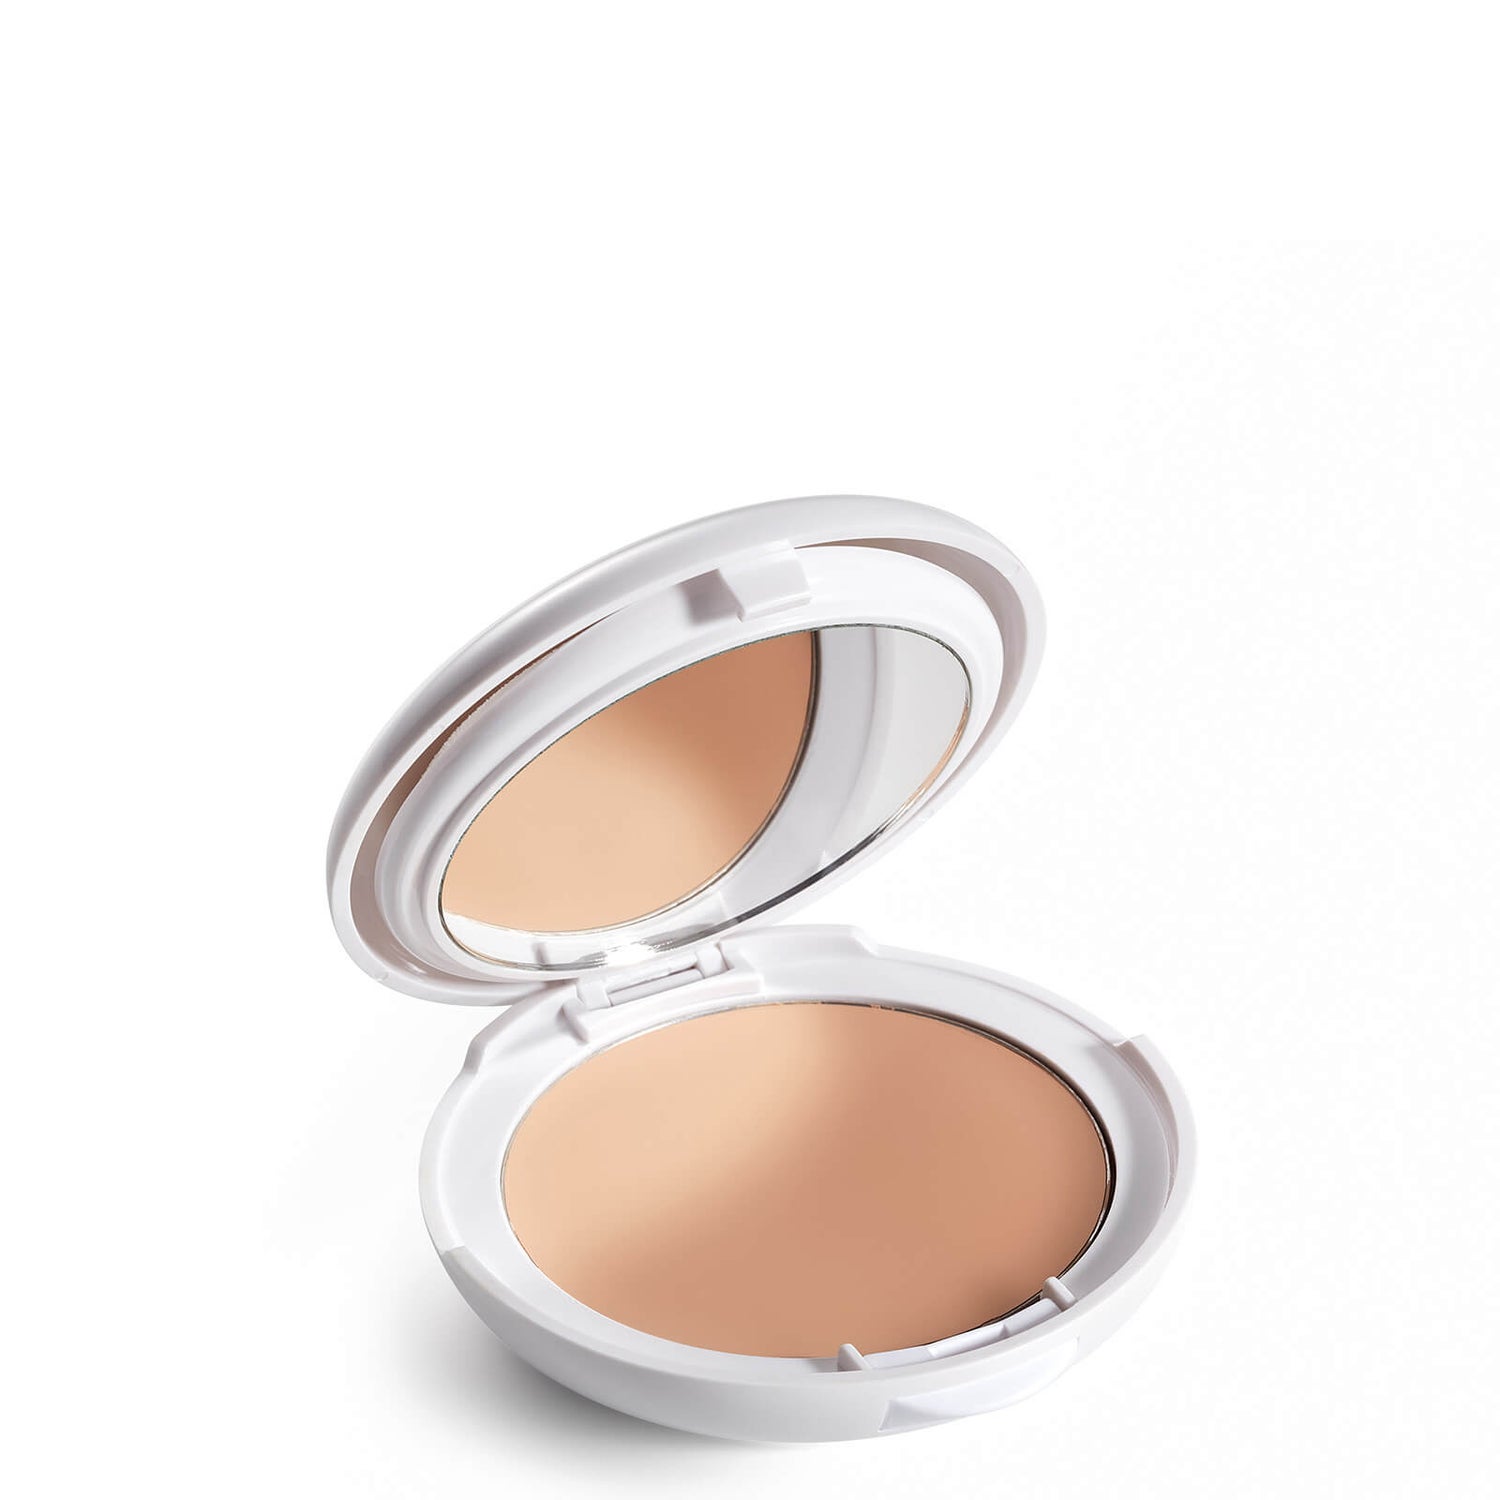 Uriage Eau Thermale Water Cream Tinted Compact SPF30 10 g